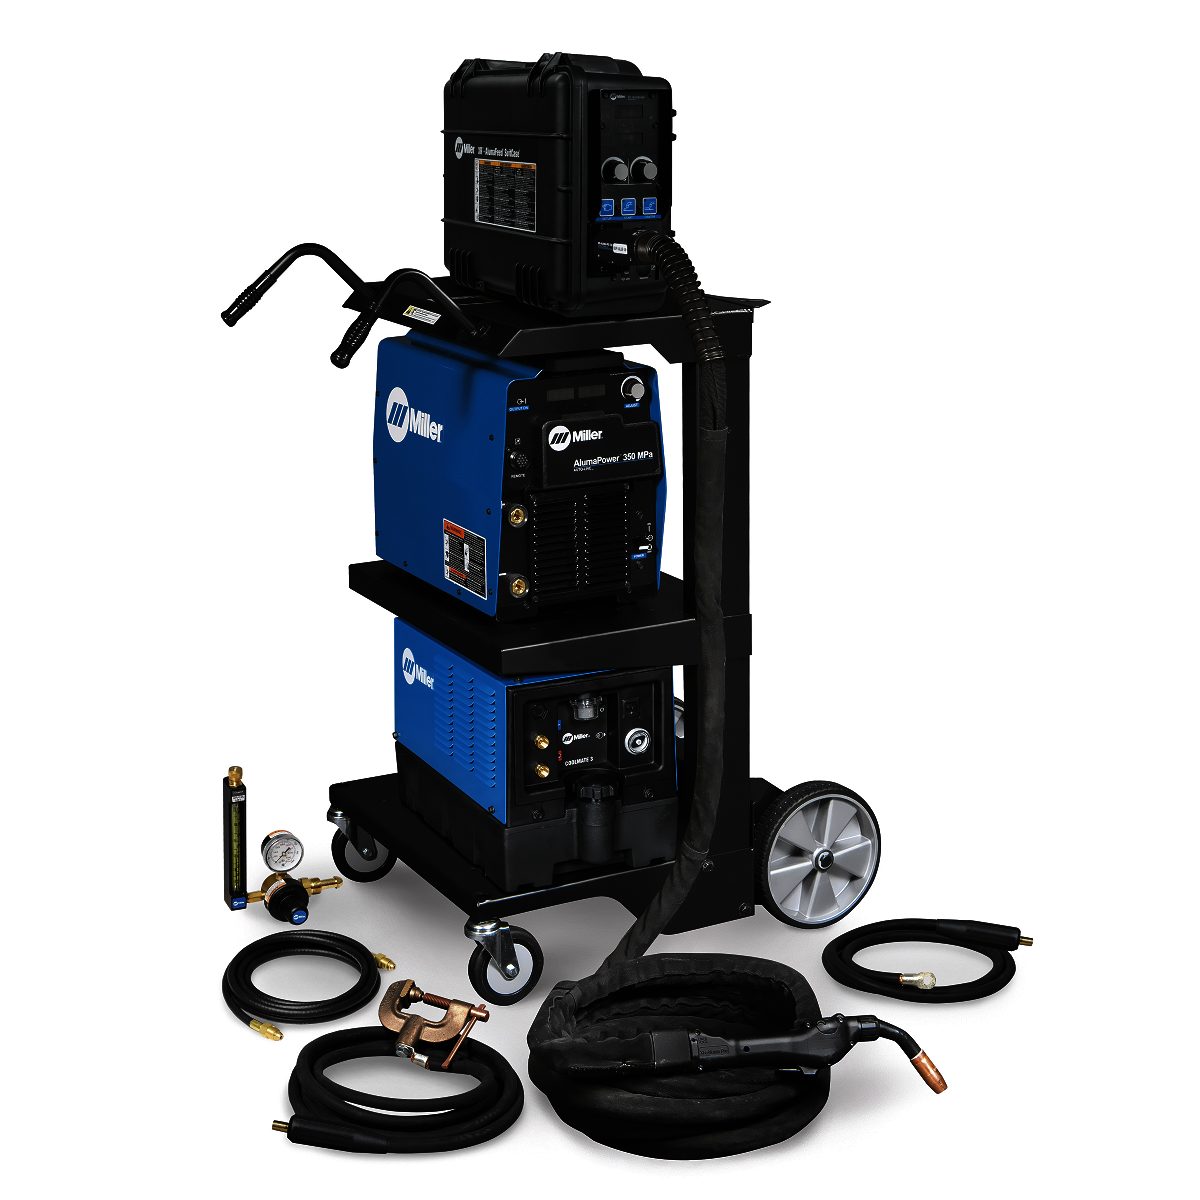 Airgas - MIL951834 - Miller® AlumaFeed® 350 Mpa 1 or 3 Phase MIG Welder  With 208 - 575 Input Voltage, 425 Amp Max Output, XR-AlumaFeed® SuitCase  Push-Pull Wire Feeder And Gun, And Accessory Package